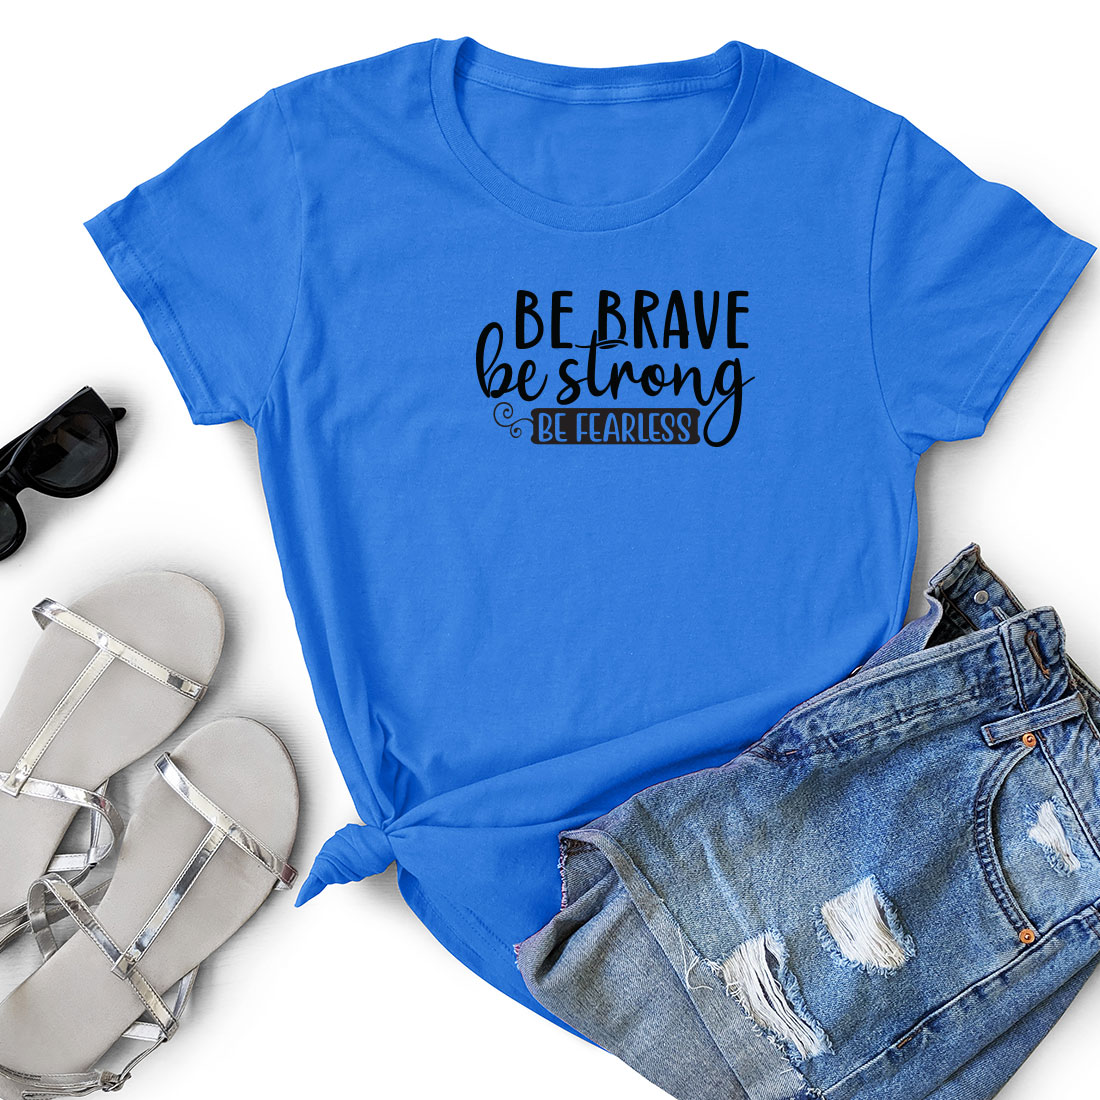 T - shirt that says be brave.